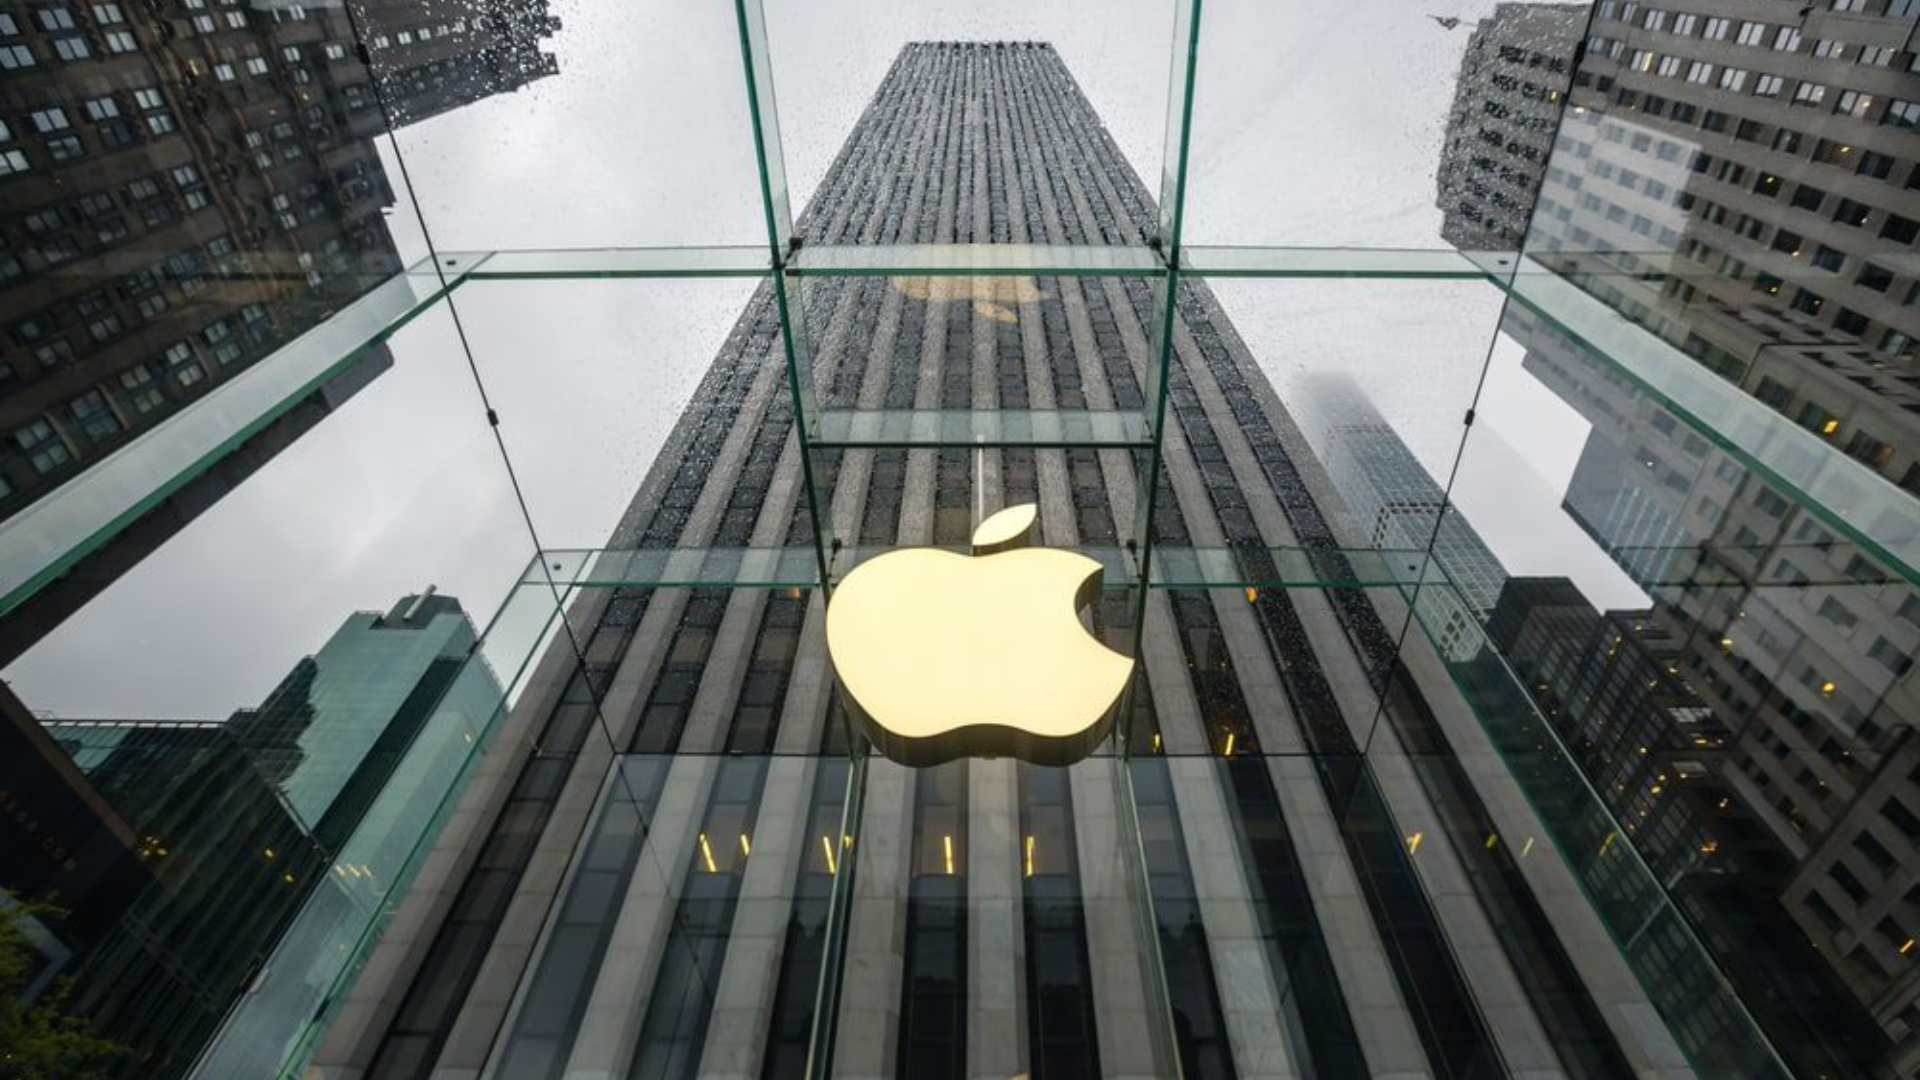 Apple Plans To Construct More Than 78,000 Residences For Its Employees In India